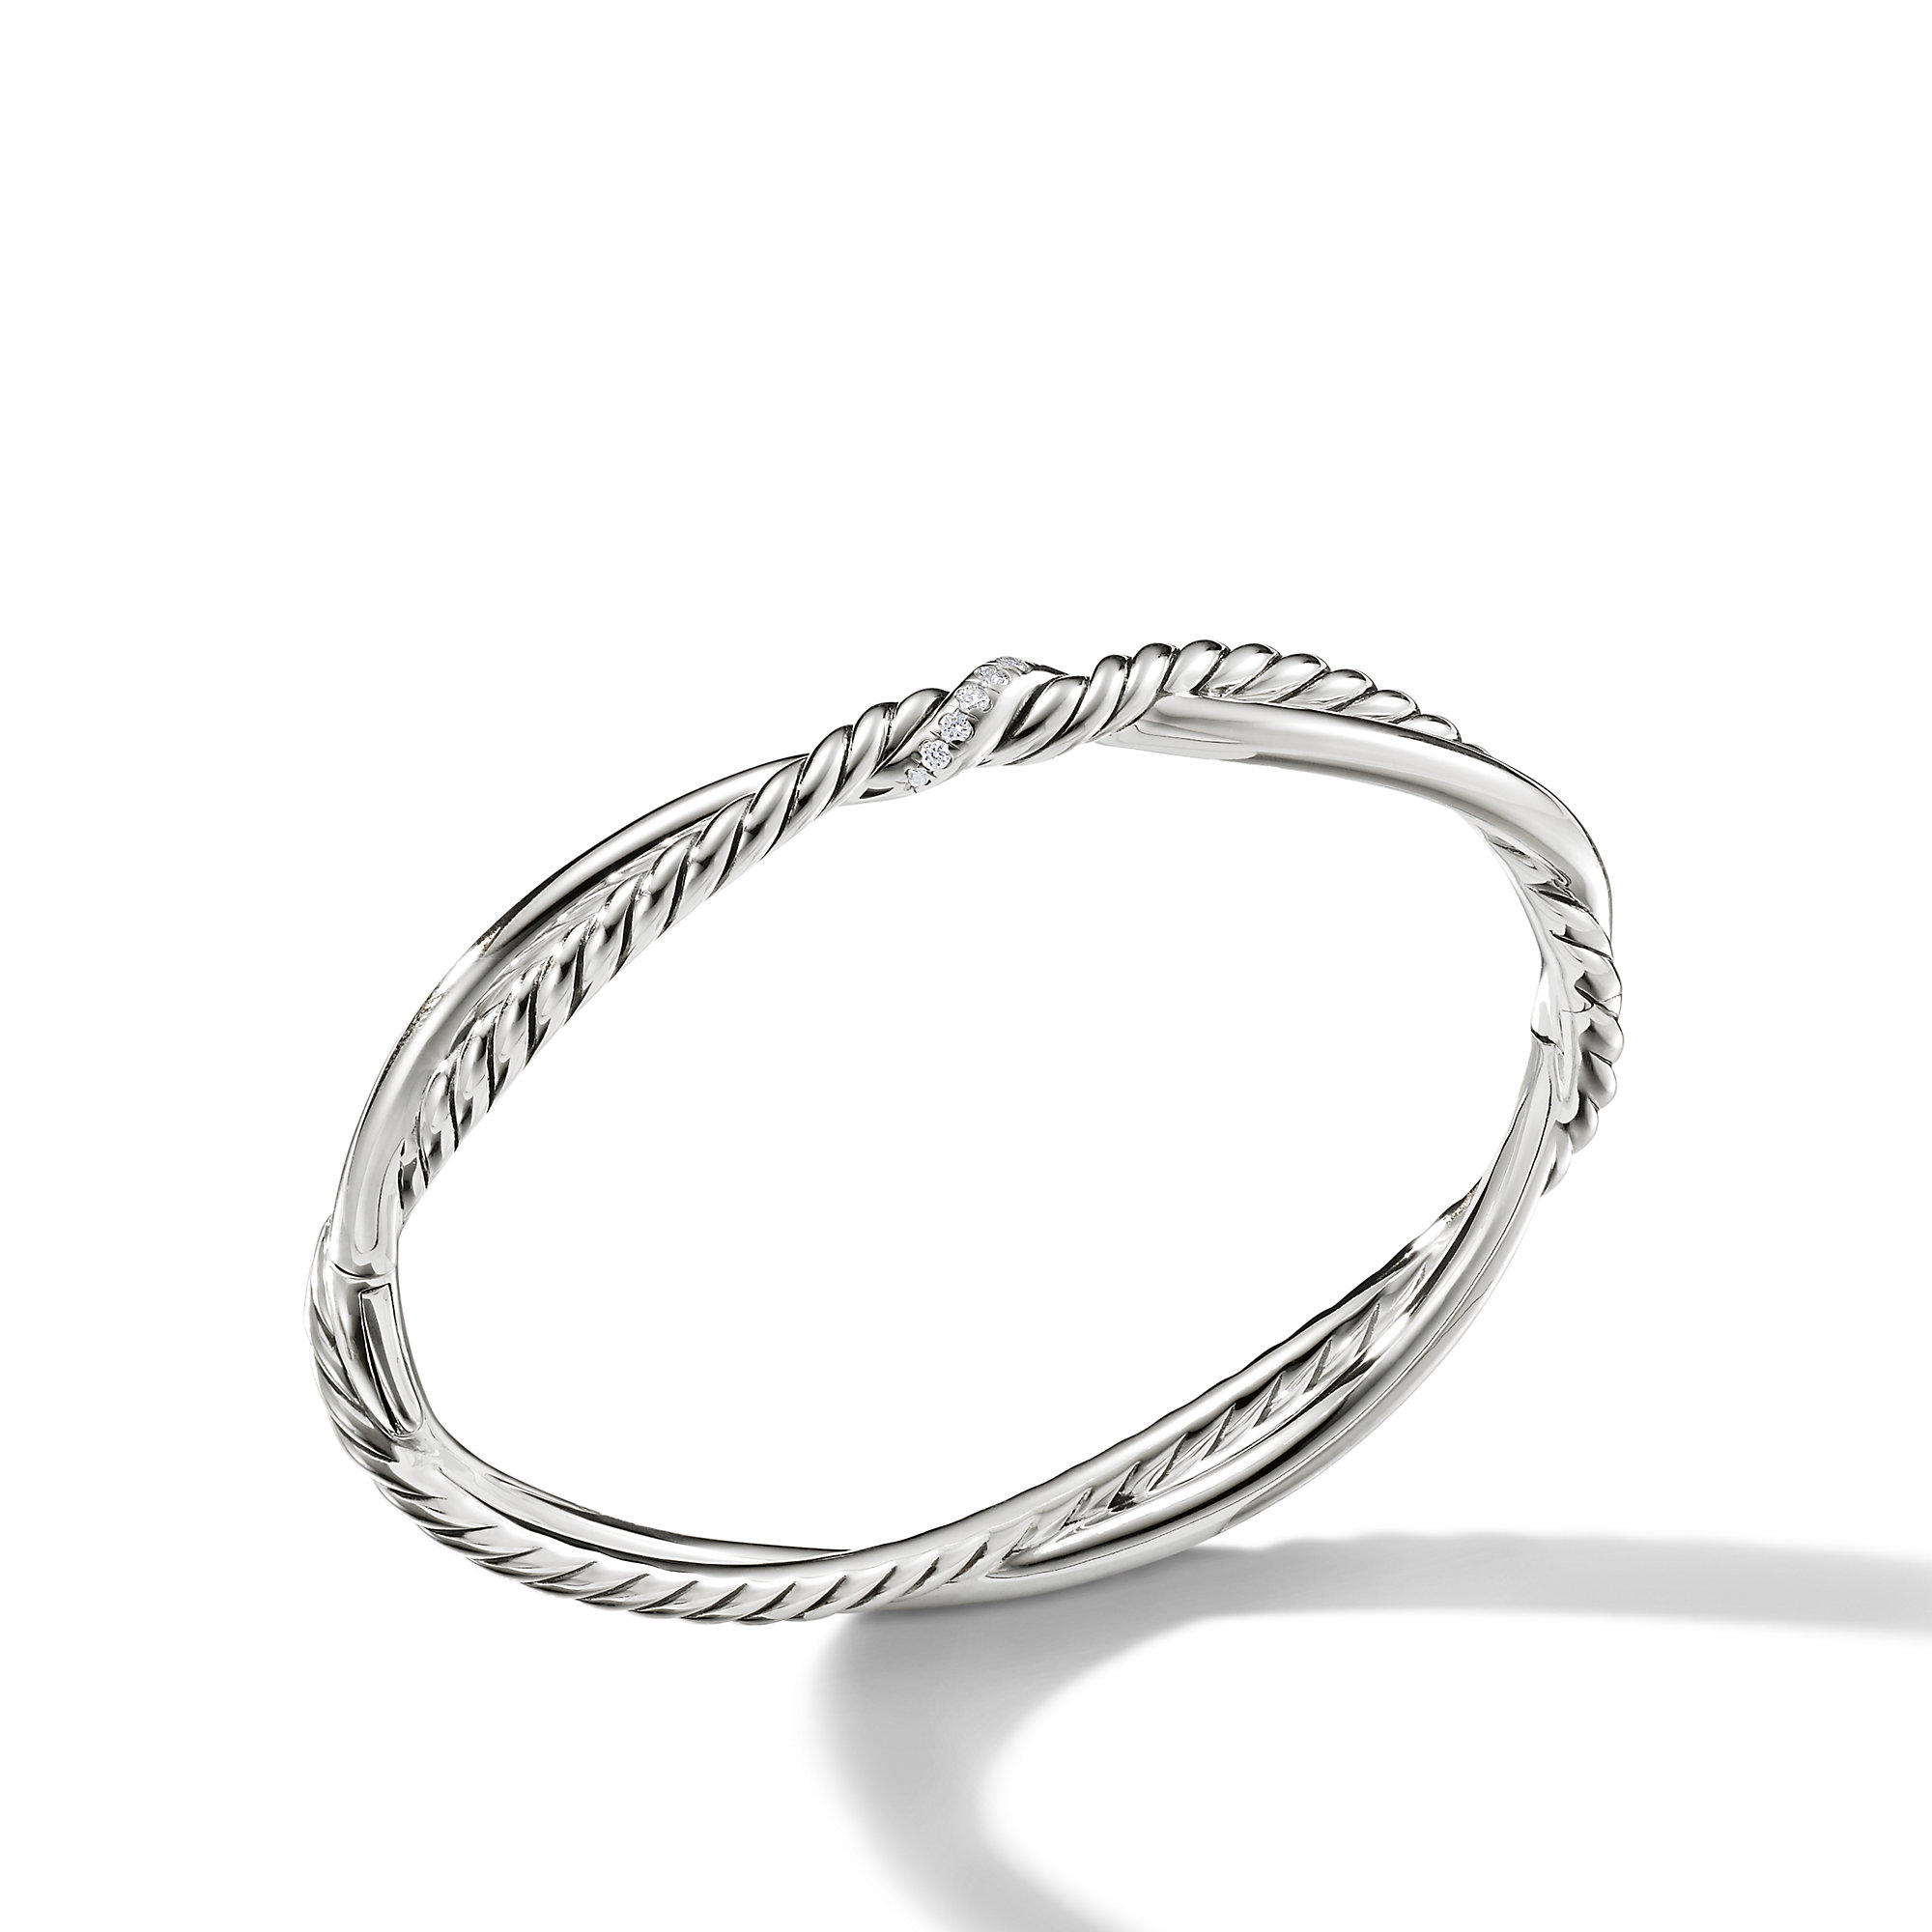 Continuance® Small Station Bracelet with Diamonds